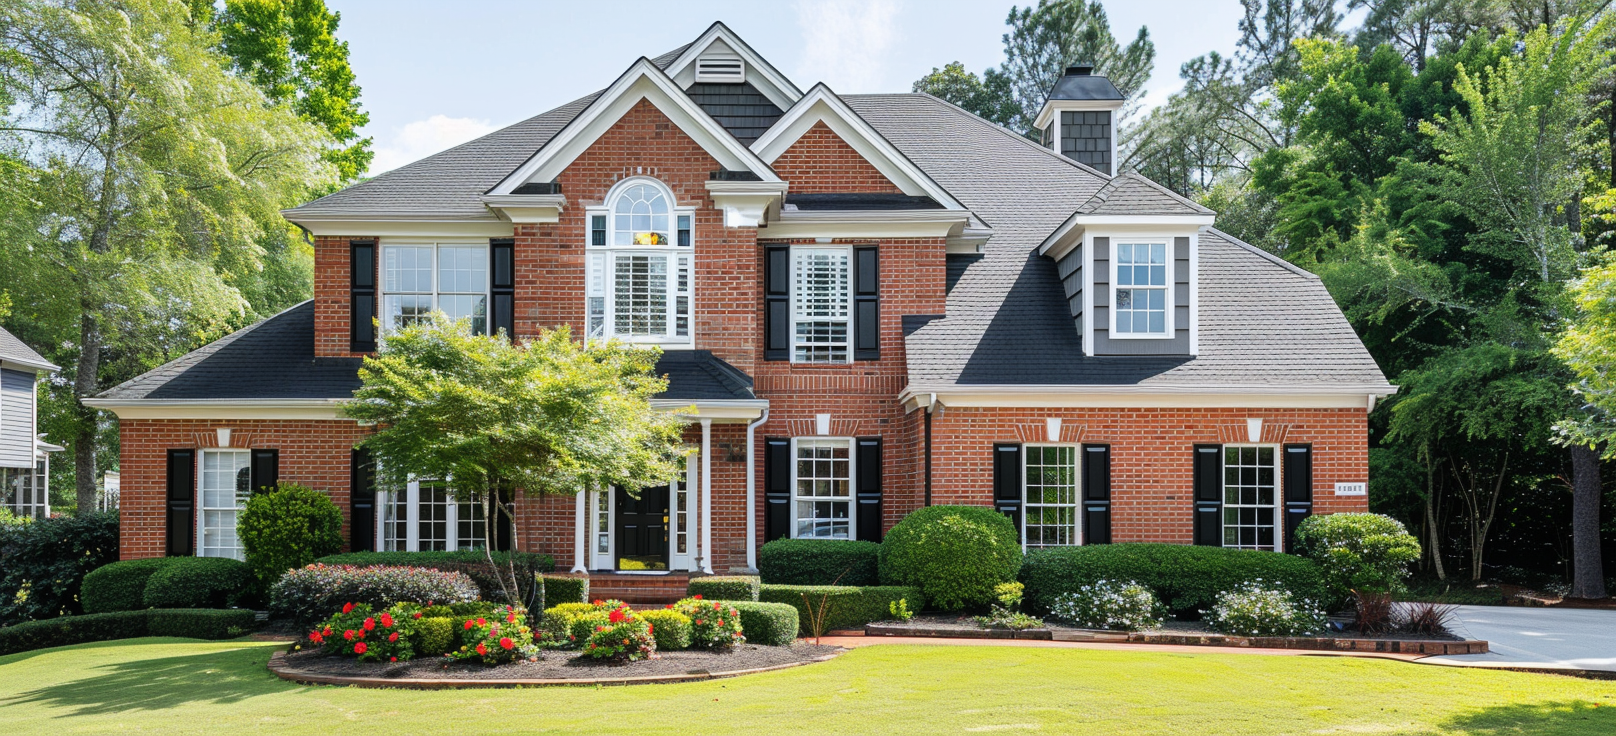 EASY WAYS TO BOOST YOUR HOME’S CURBSIDE APPEAL